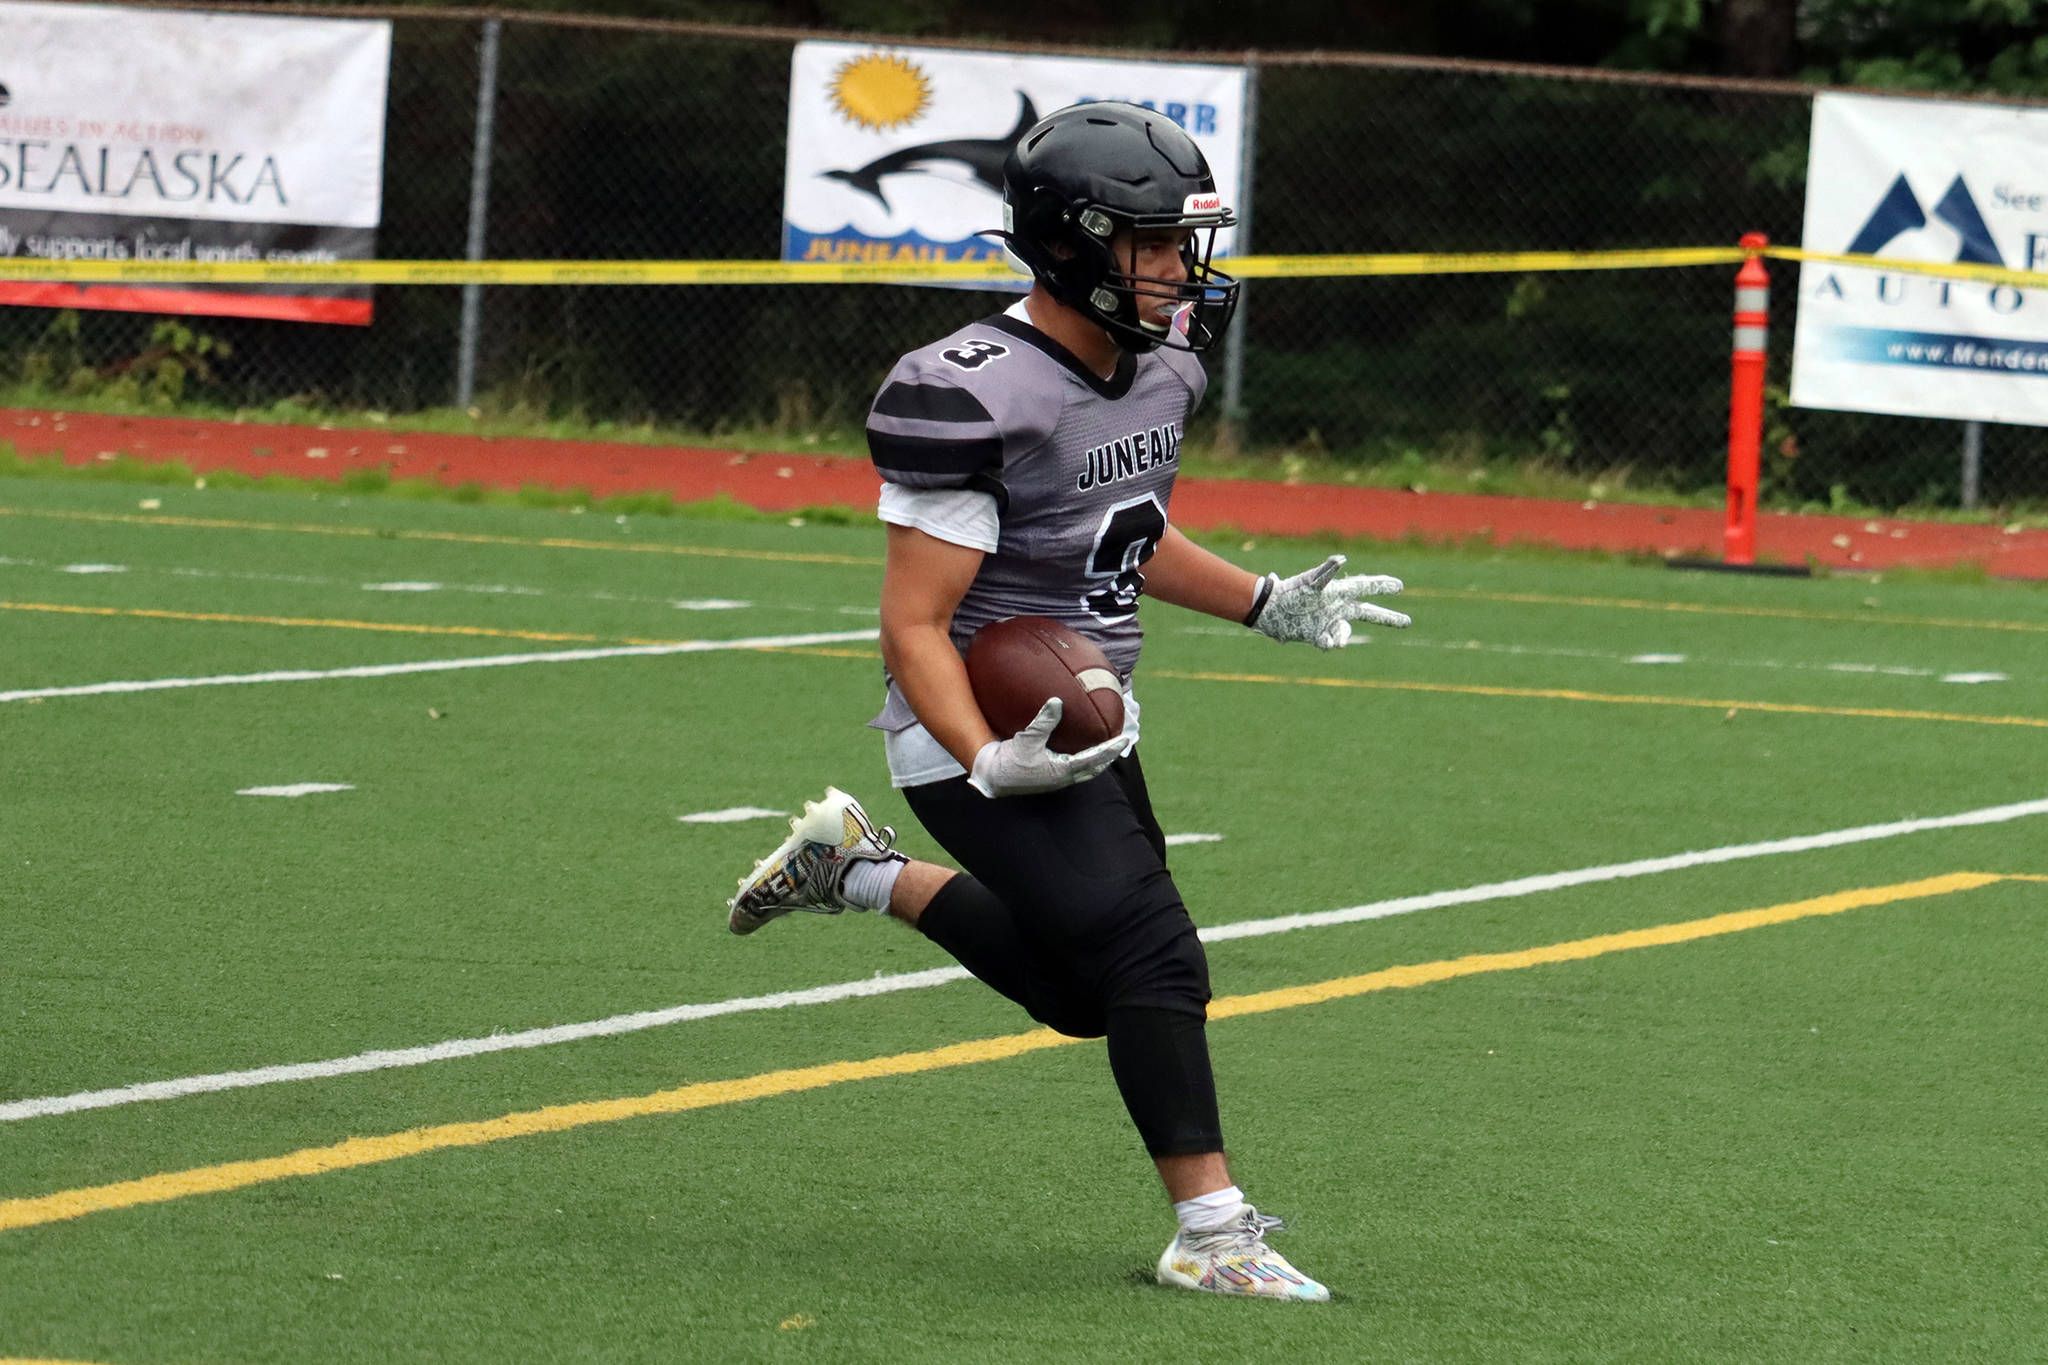 Gaby Soto crosses the goalline to put six points on the board for the Huskies in Juneau's first high school football game in nearly two years. Soto scored three touchdowns for the Huskies in the first half. (Ben Hohenstatt / Juneau Empire)